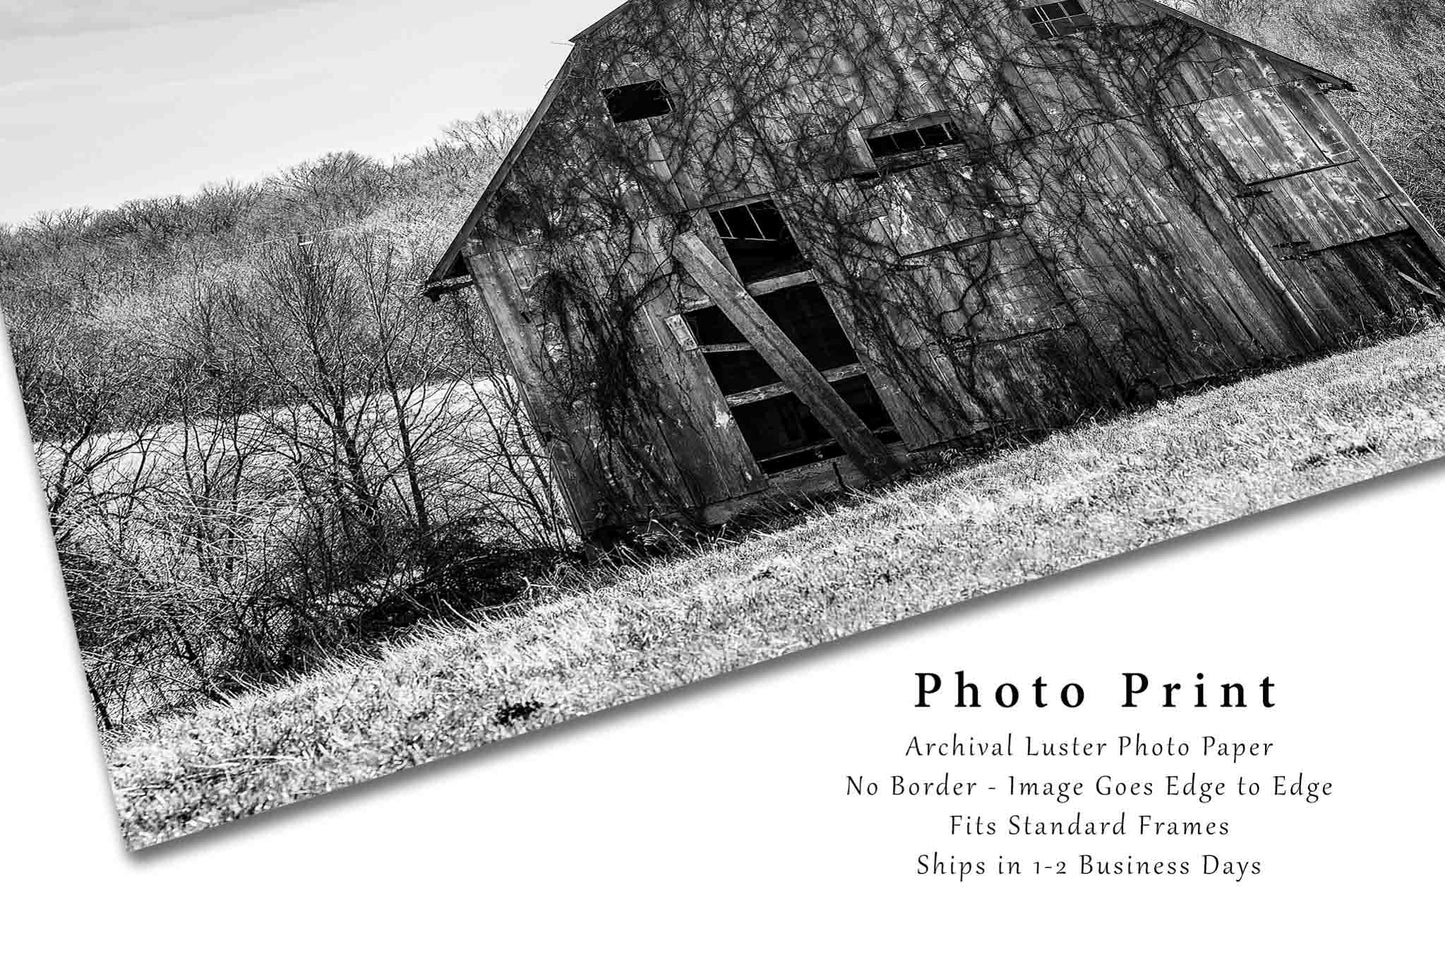 Country Photography Print - Picture of Old Rustic Barn Covered in Vines in Missouri Black and White Farmhouse Decor Wall Art Photo Artwork